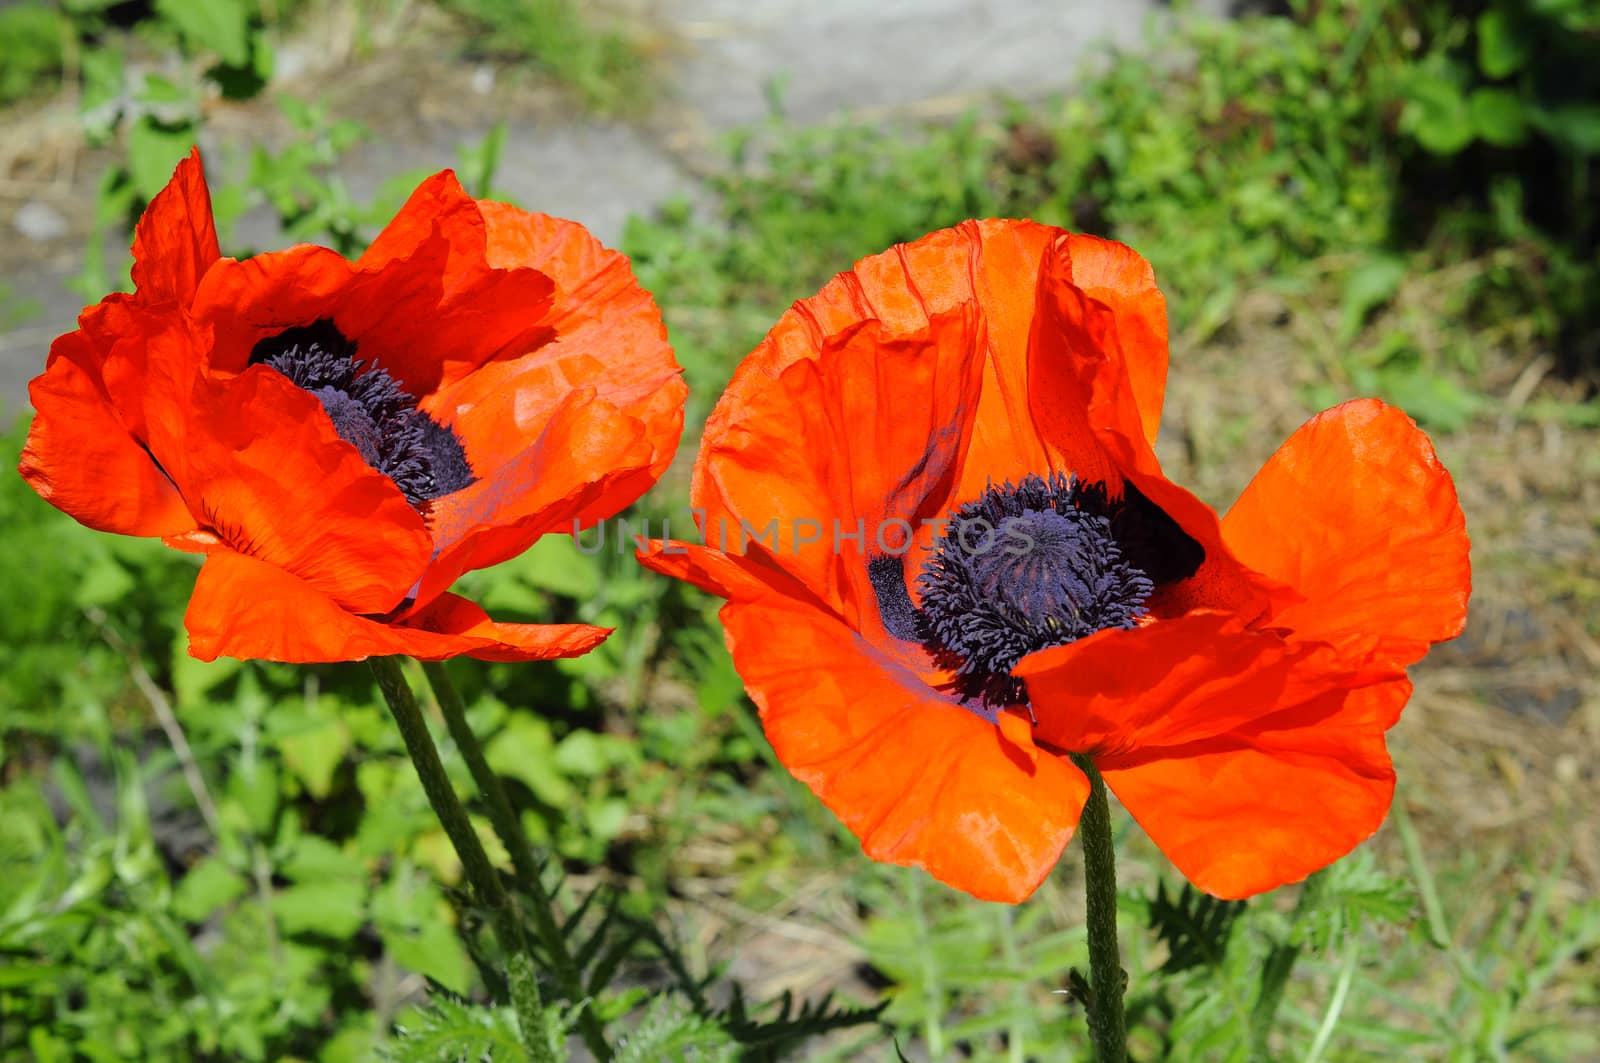 Big red poppies in a garden